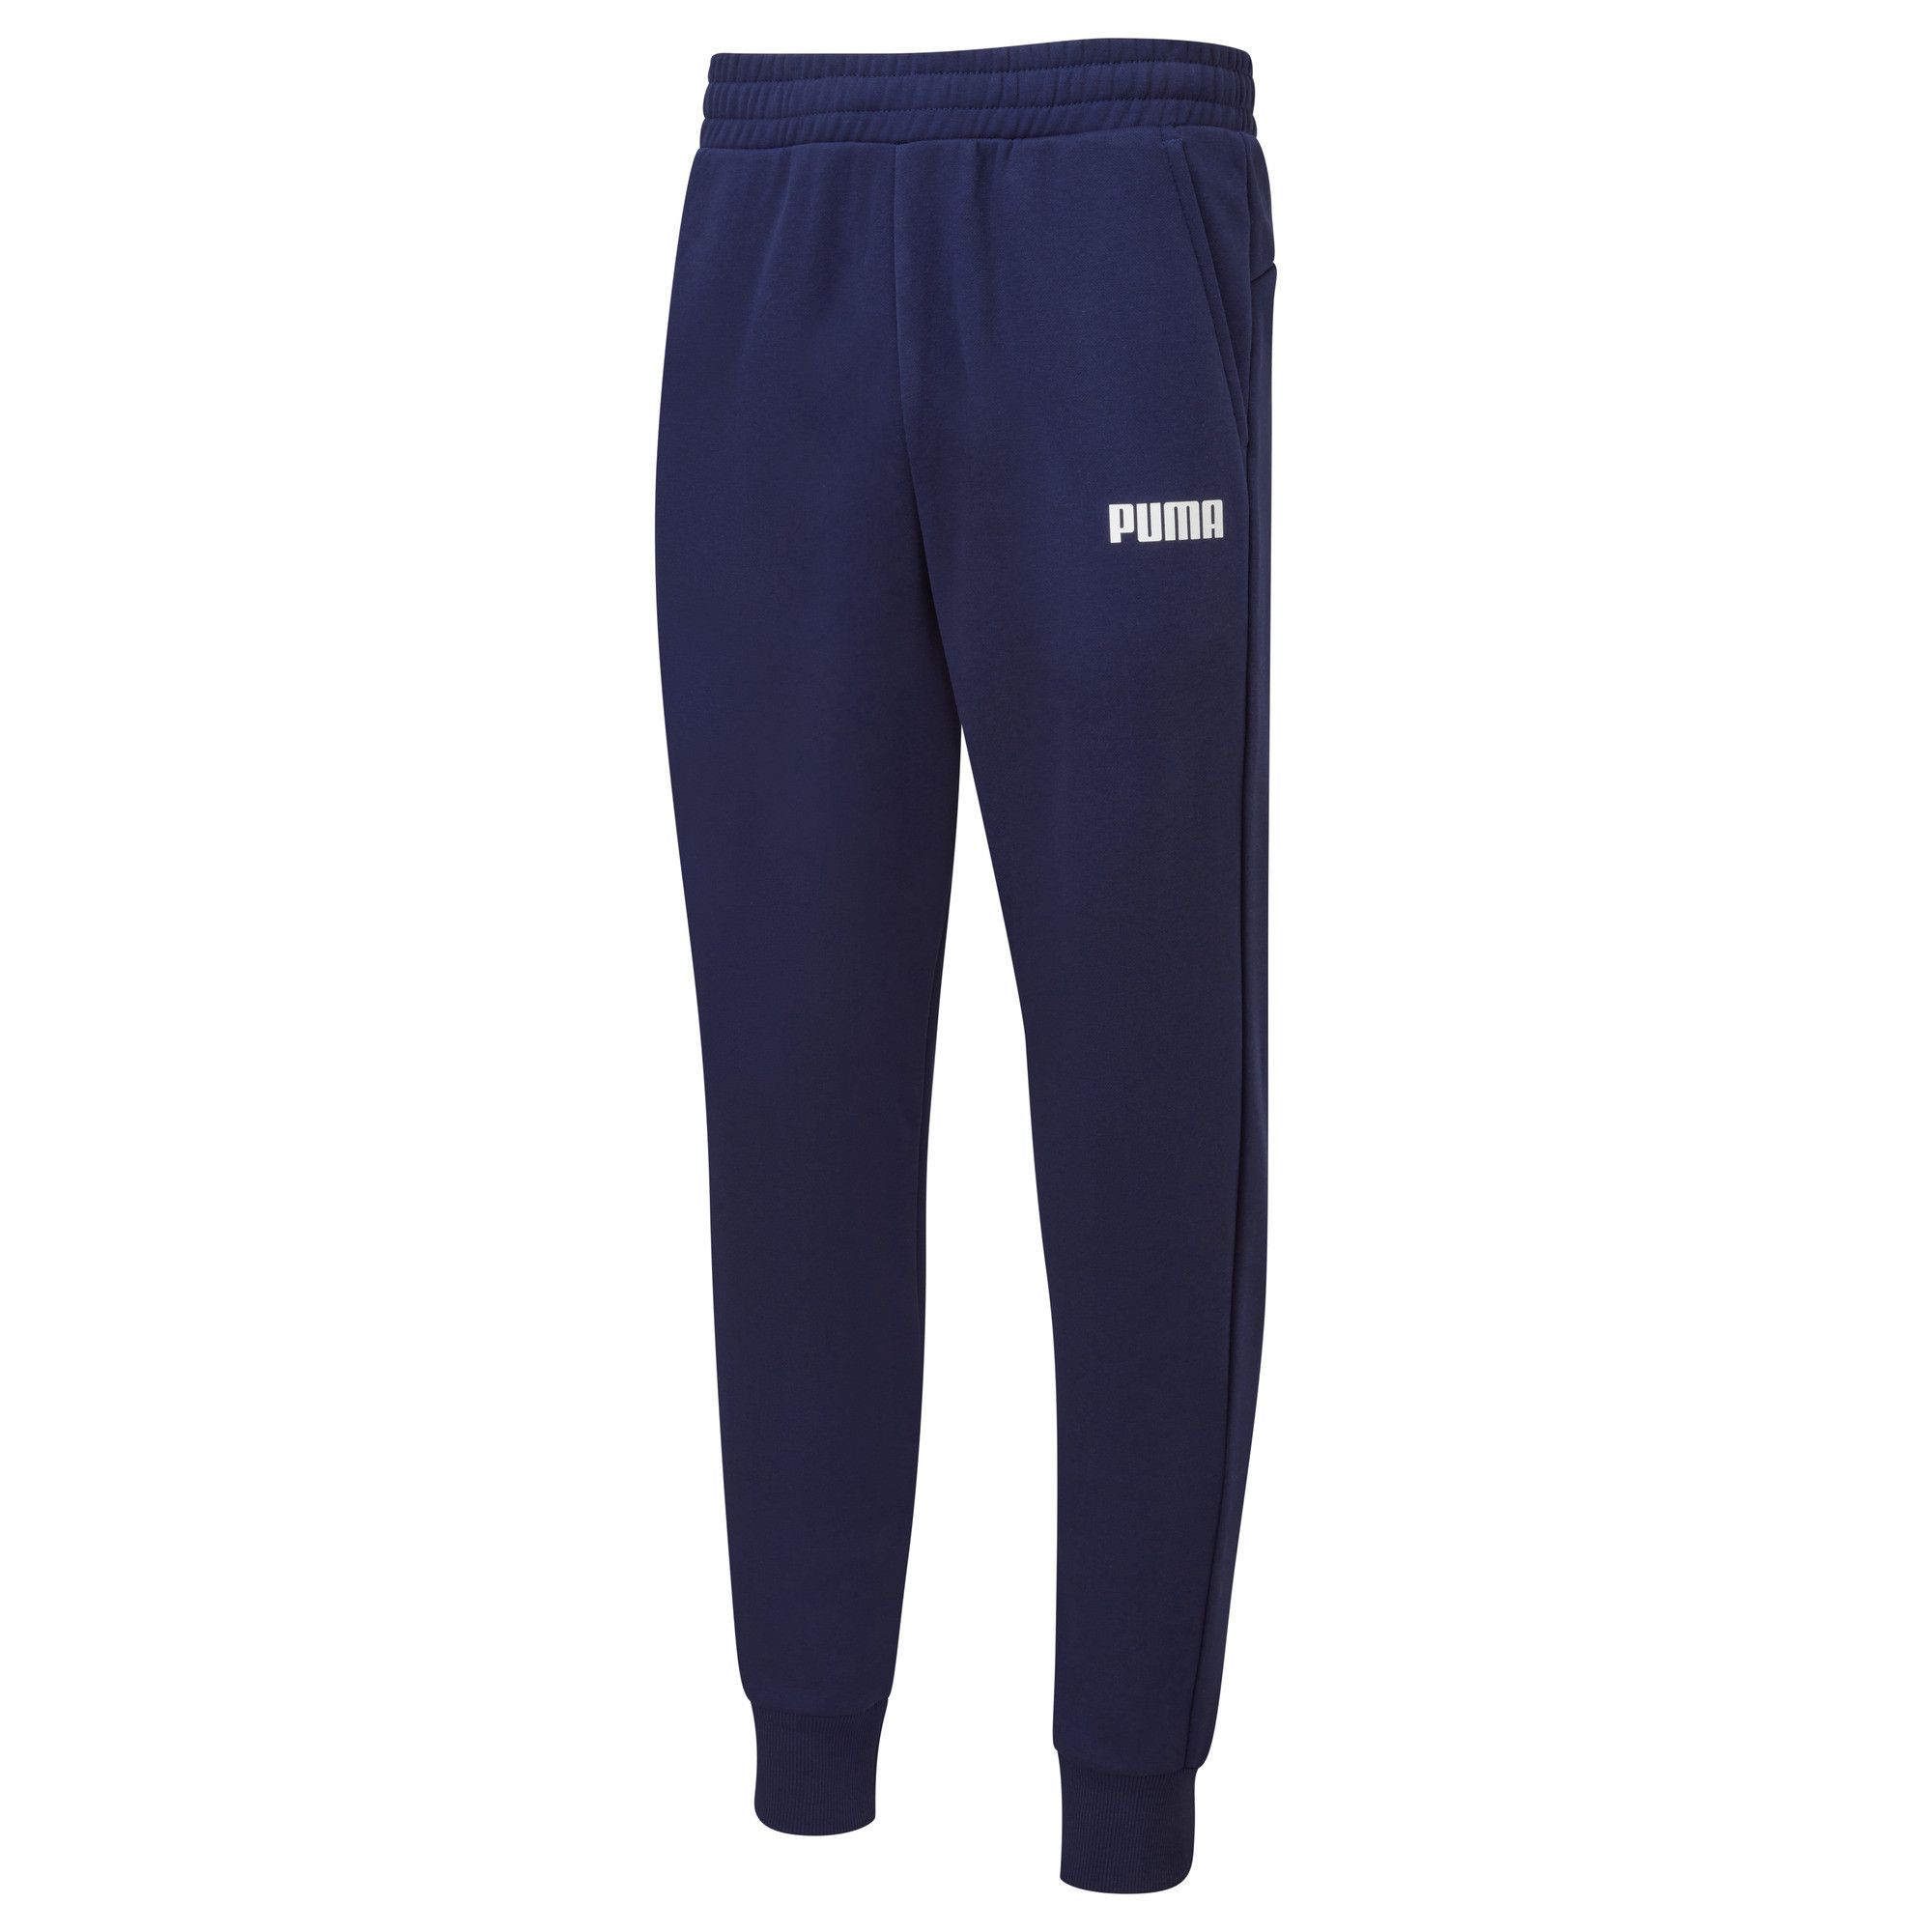  Say hello to your new best friend, these fleece pants that every wardrobe needs. FEATURES & BENEFITS Recycled Content: Made with at least 20% recycled material as a step toward a better future 

DETAILS Comfortable style by PUMA. PUMA branding details. Signature PUMA design elements.